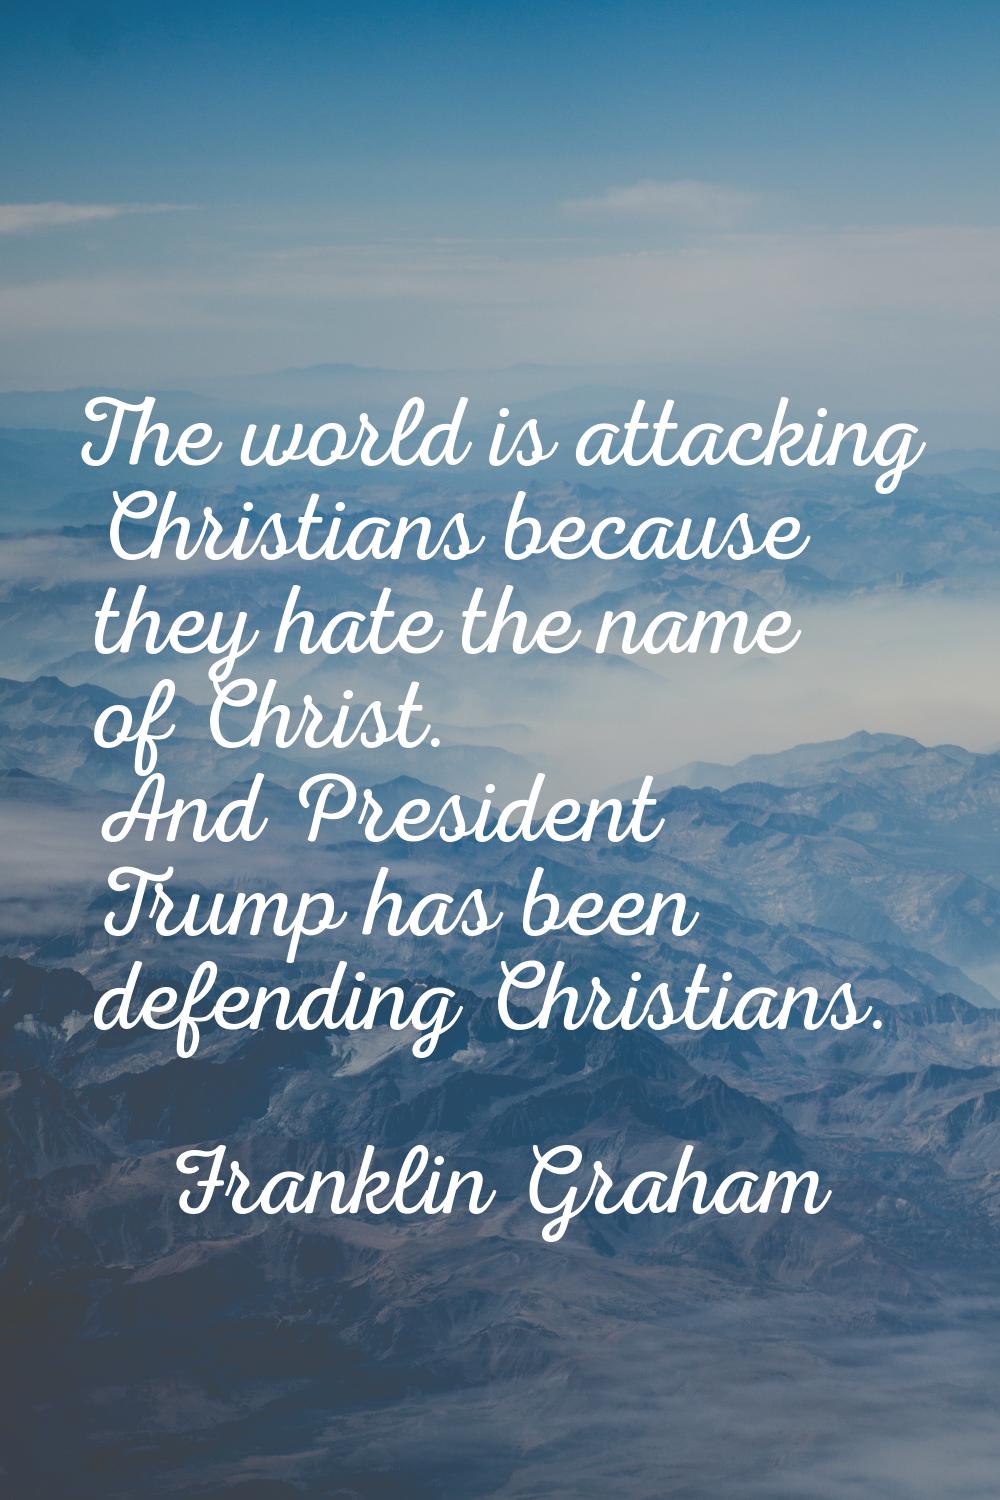 The world is attacking Christians because they hate the name of Christ. And President Trump has bee